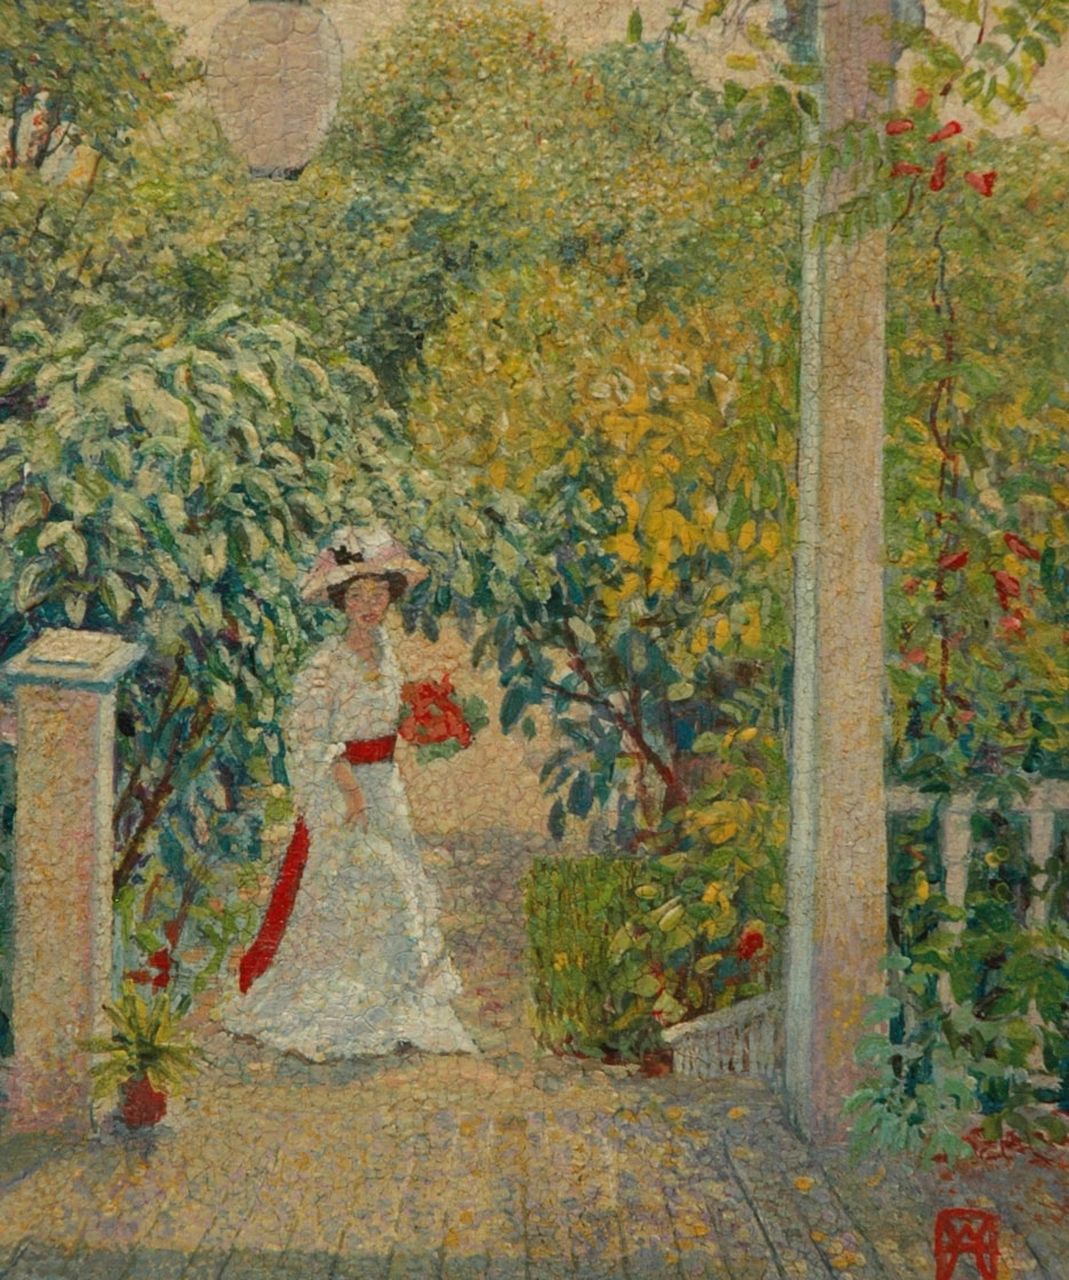 Ames W.  | Wally Ames, Woman in white dress in a garden, oil on board 22.4 x 18.6 cm, signed l.r. with monogram